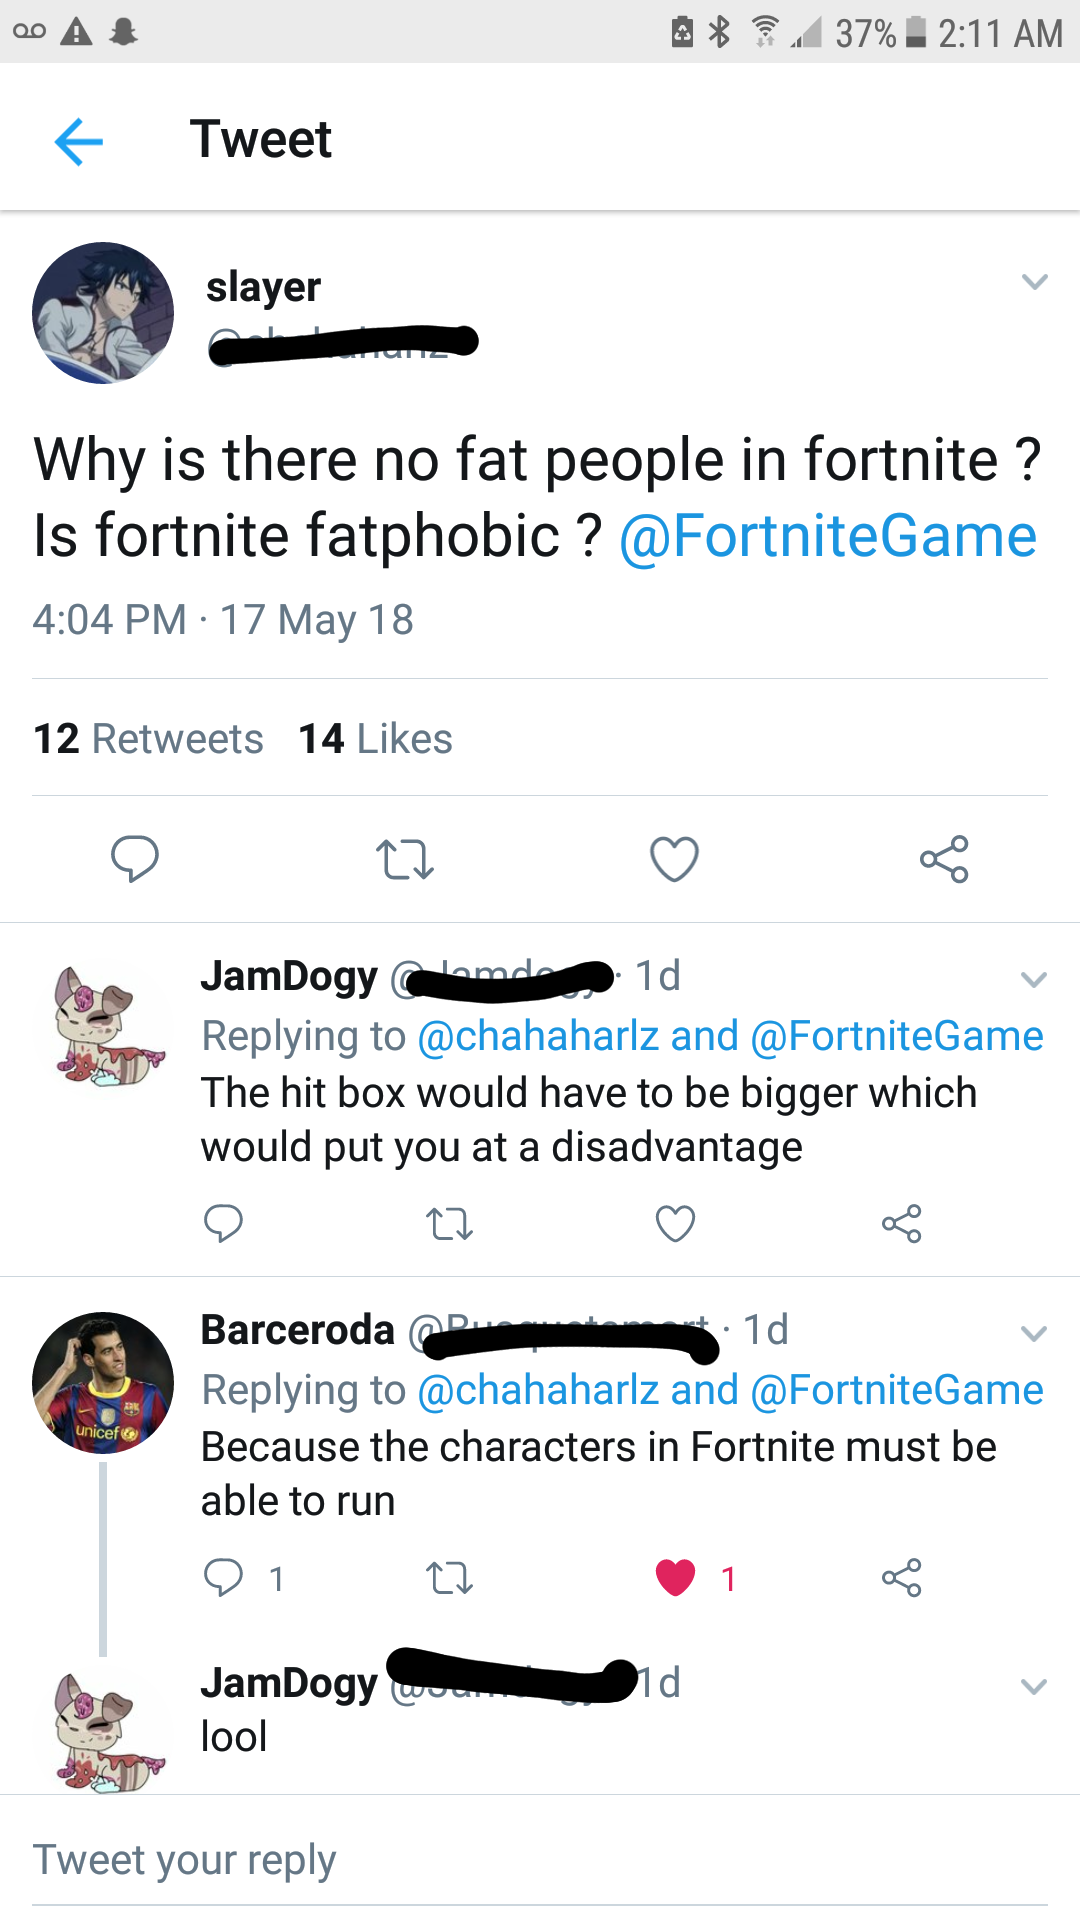 screenshot - 37% Tweet slayer Why is there no fat people in fortnite ? Is fortnite fatphobic ? 17 May 18 12 14 Cz JamDogy Camde 1d and The hit box would have to be bigger which would put you at a disadvantage 27 Unicef Barceroda D 1 d and Because the char